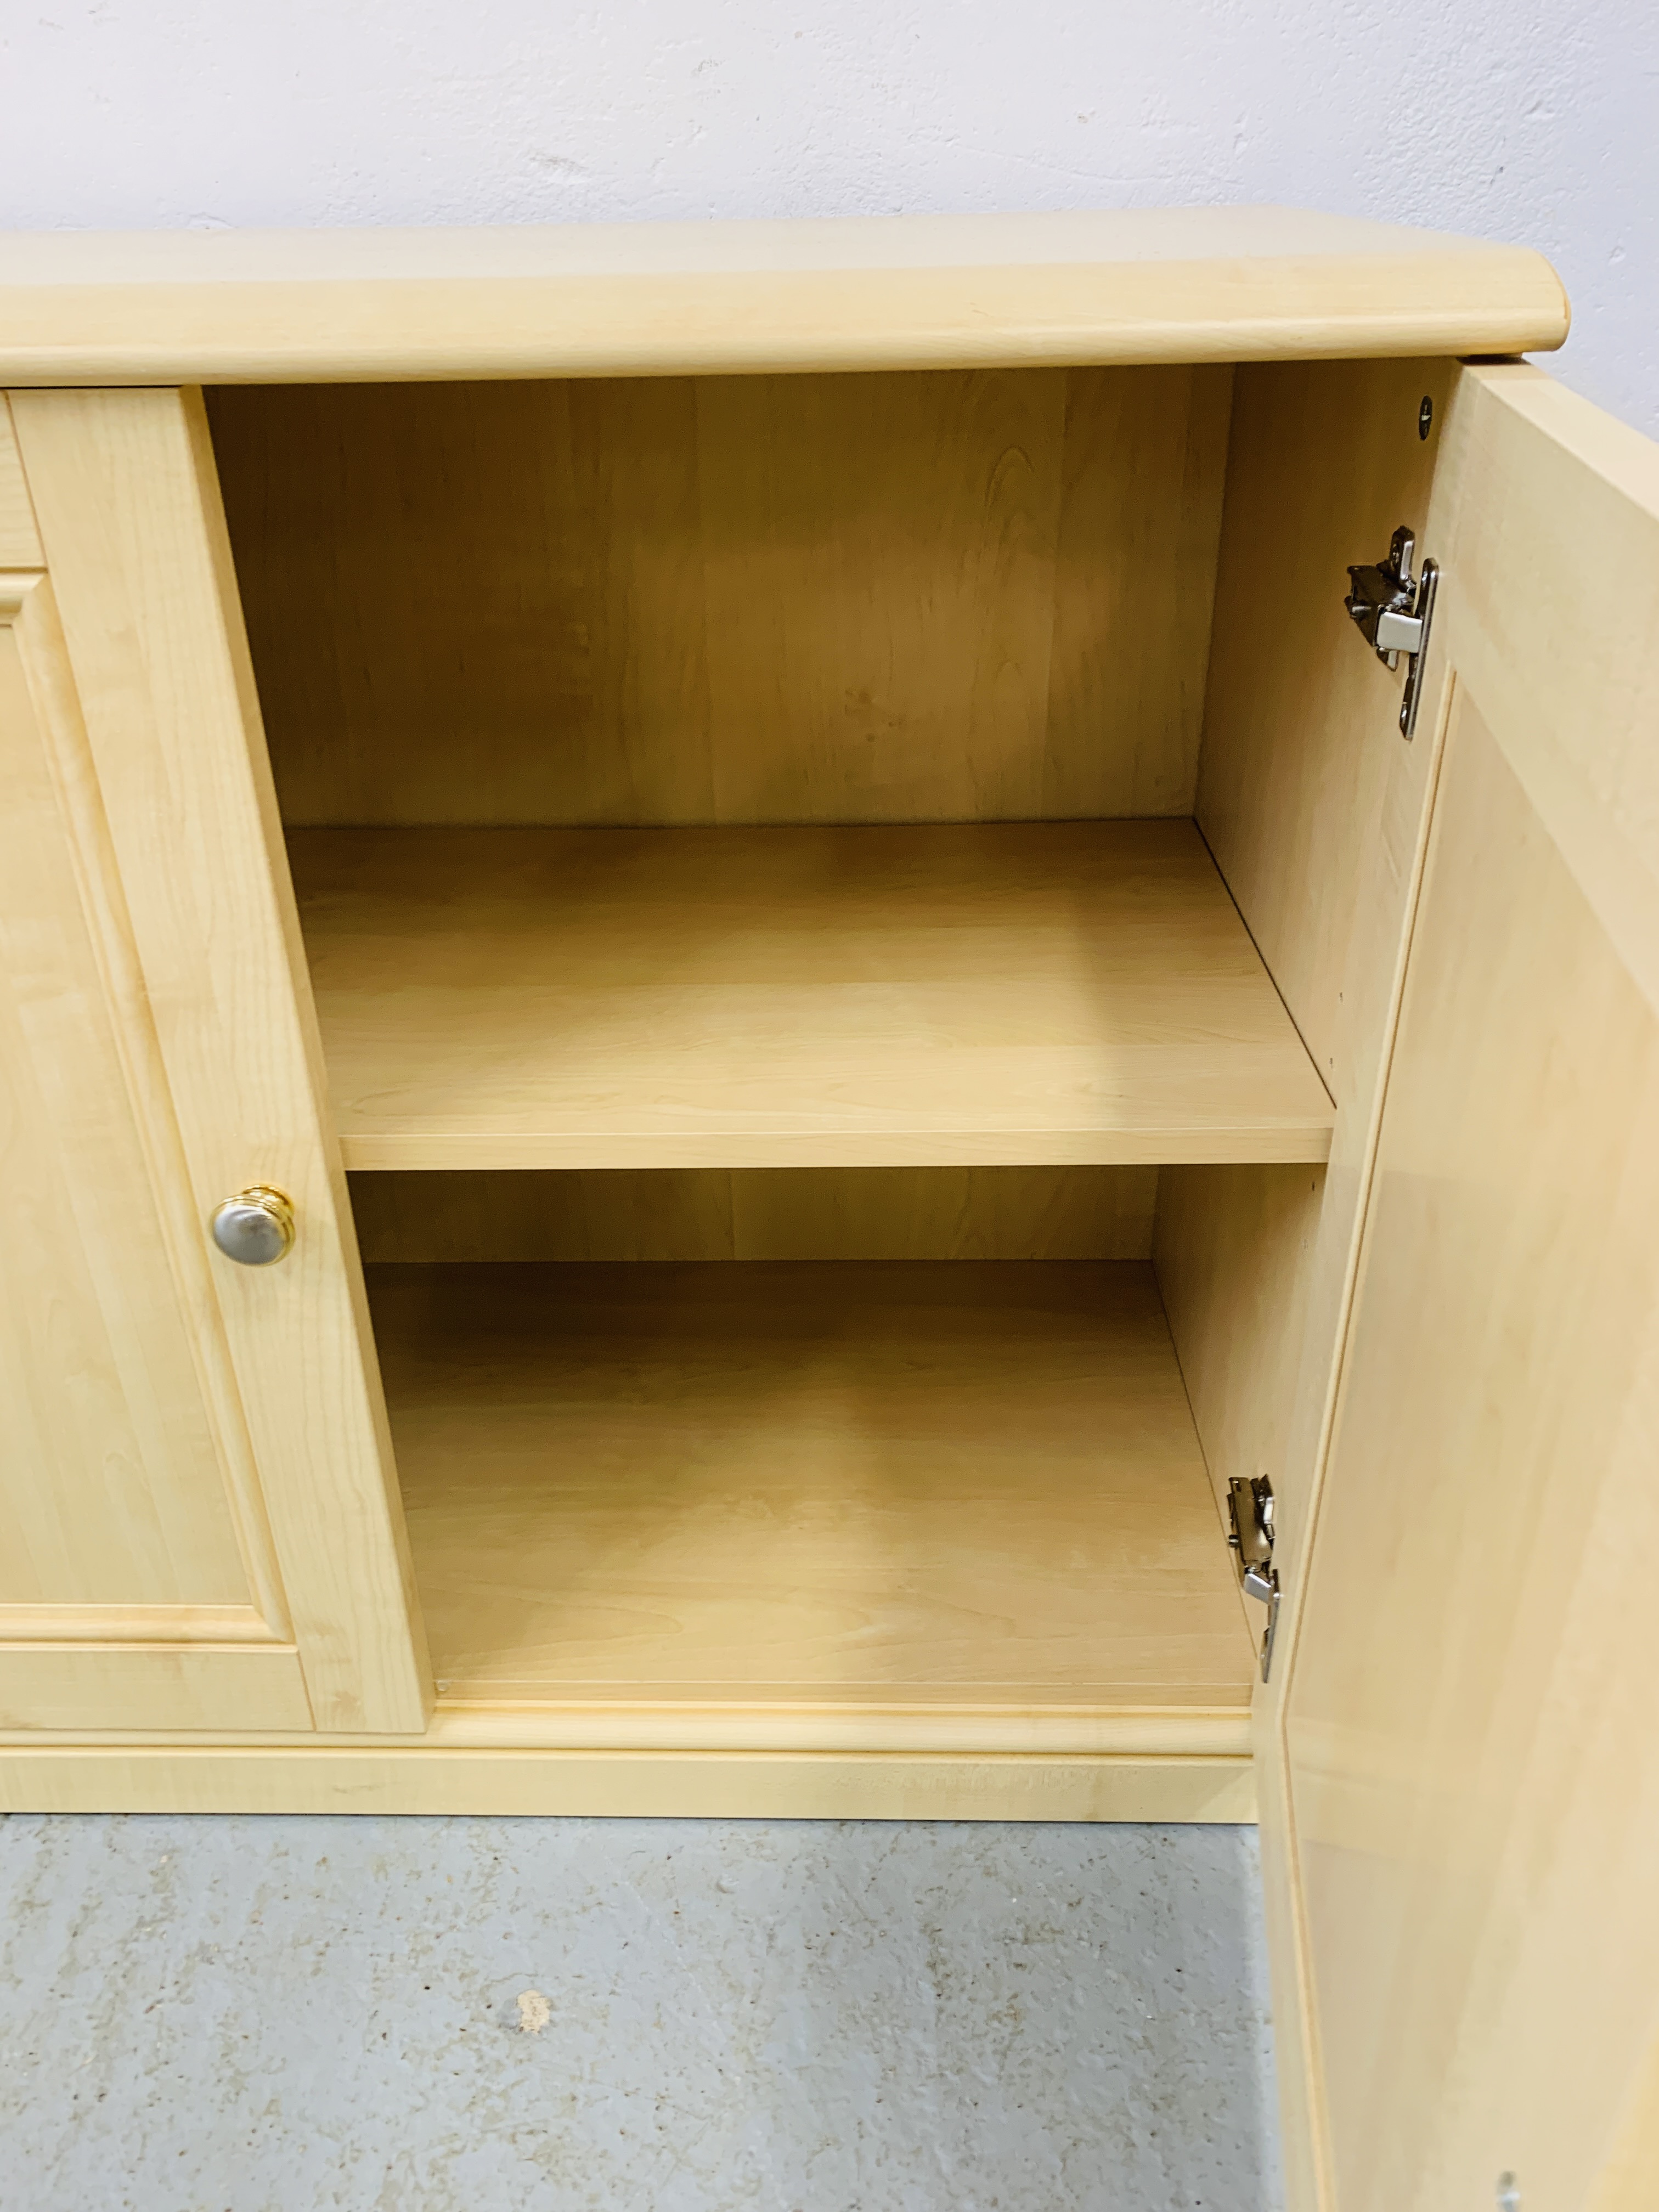 A LIGHT ASH FINISH TWO DOOR SHELVED STORAGE CABINET. WIDTH 90cm, HEIGHT 76cm, DEPTH 45cm. - Image 6 of 6